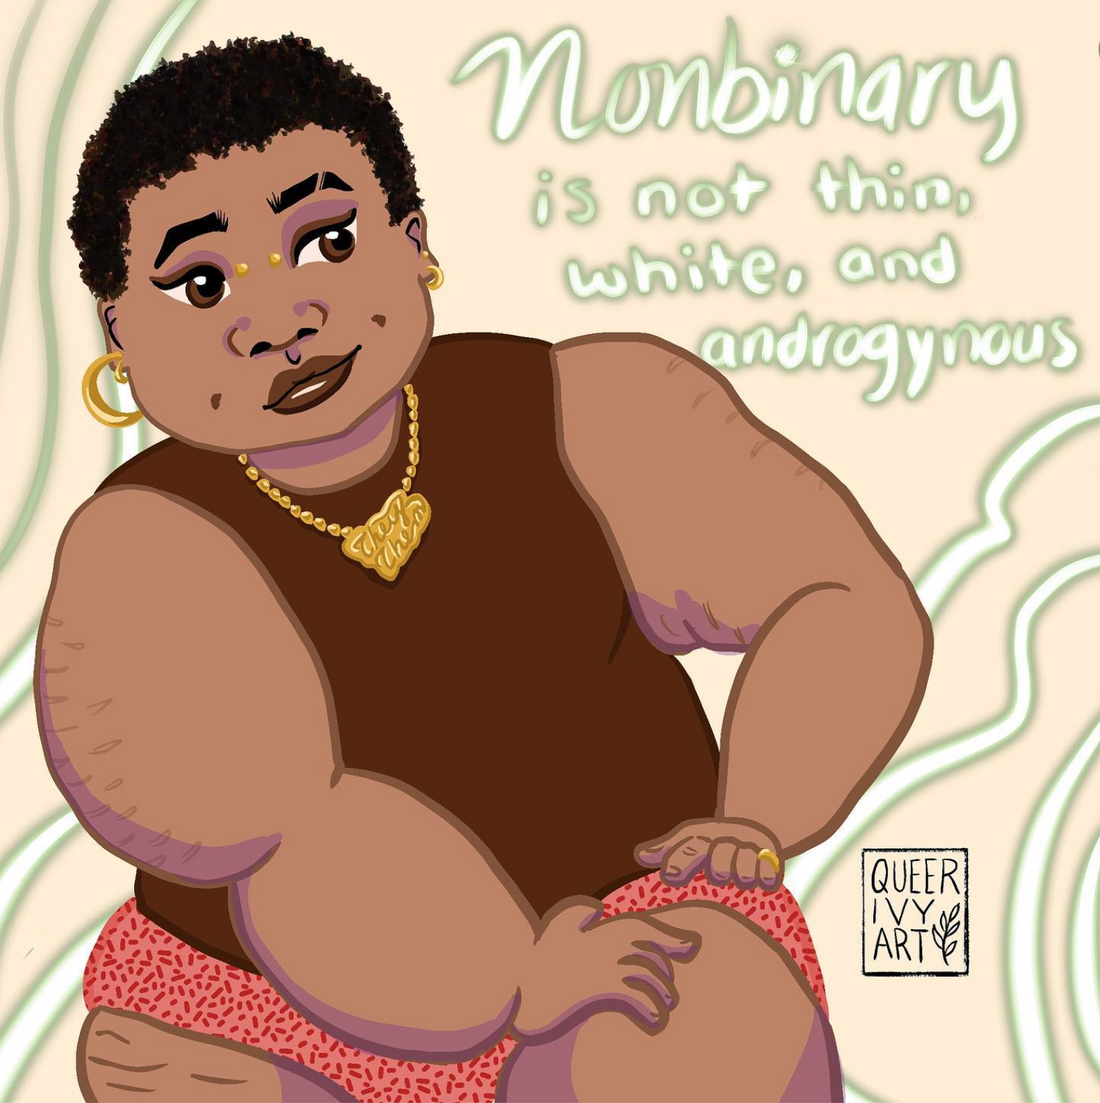 There are Infinite Ways to be Nonbinary